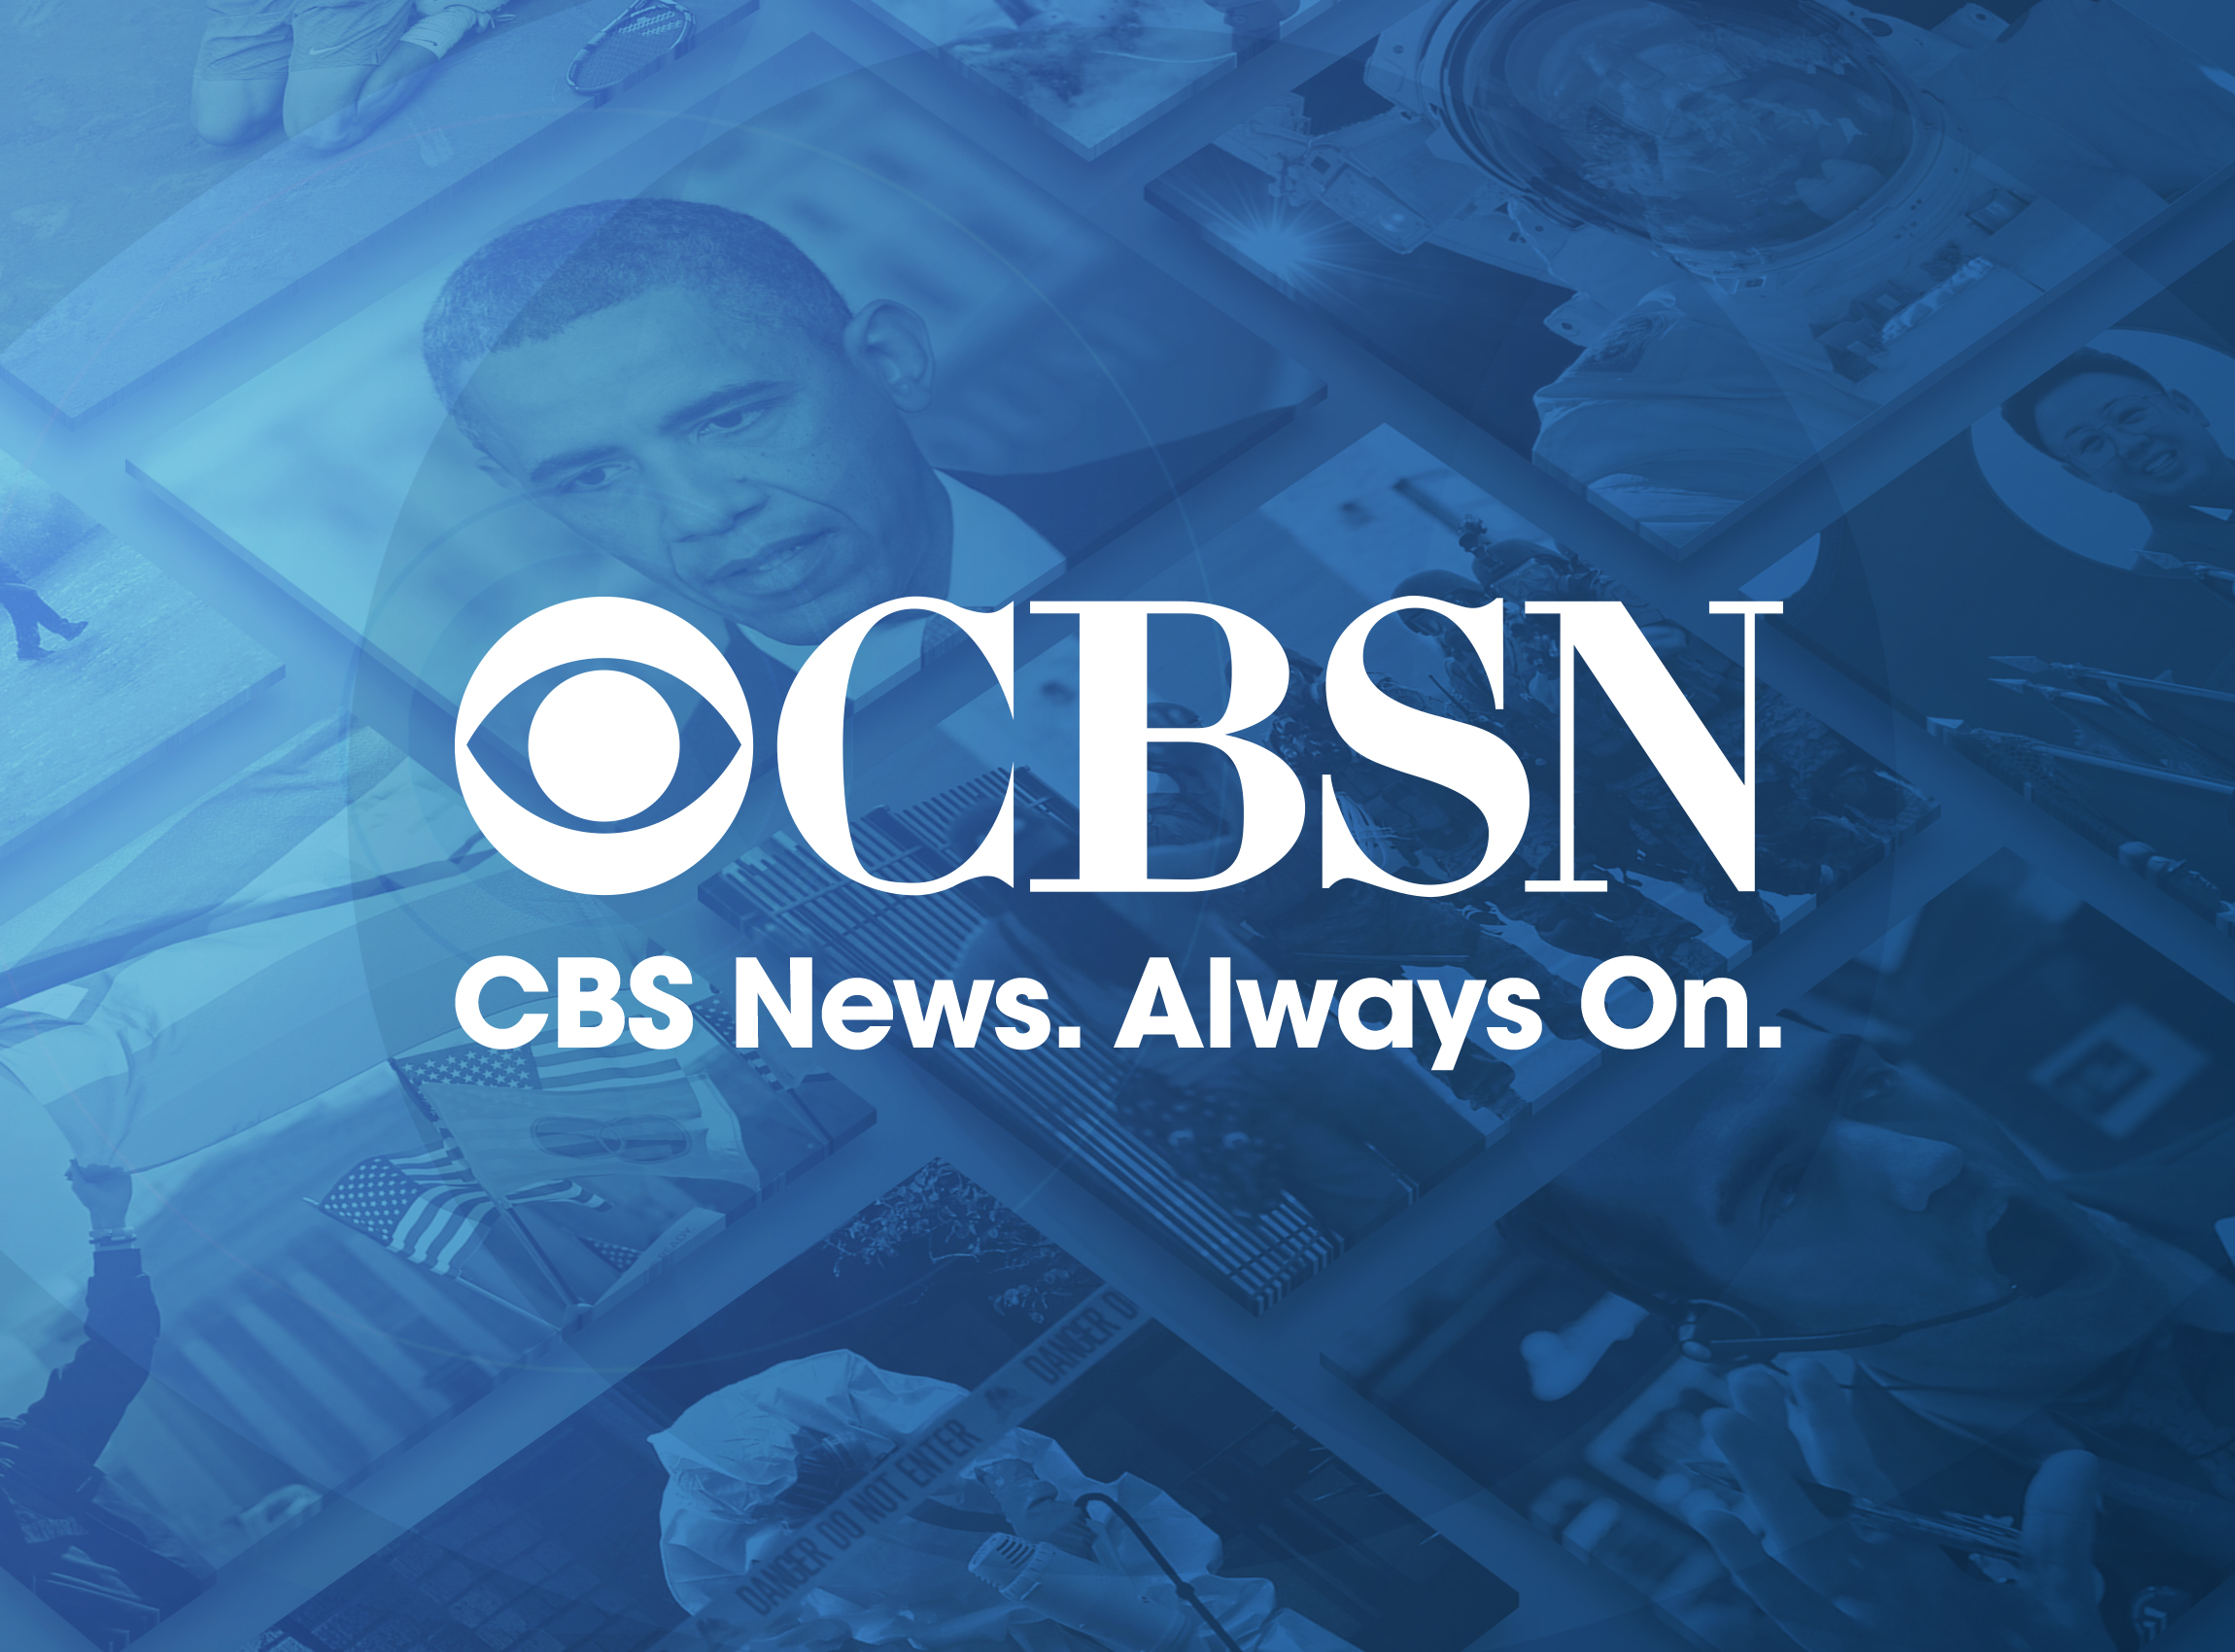 New on CBS News CBSN, the Live, Anchored Streaming News Network